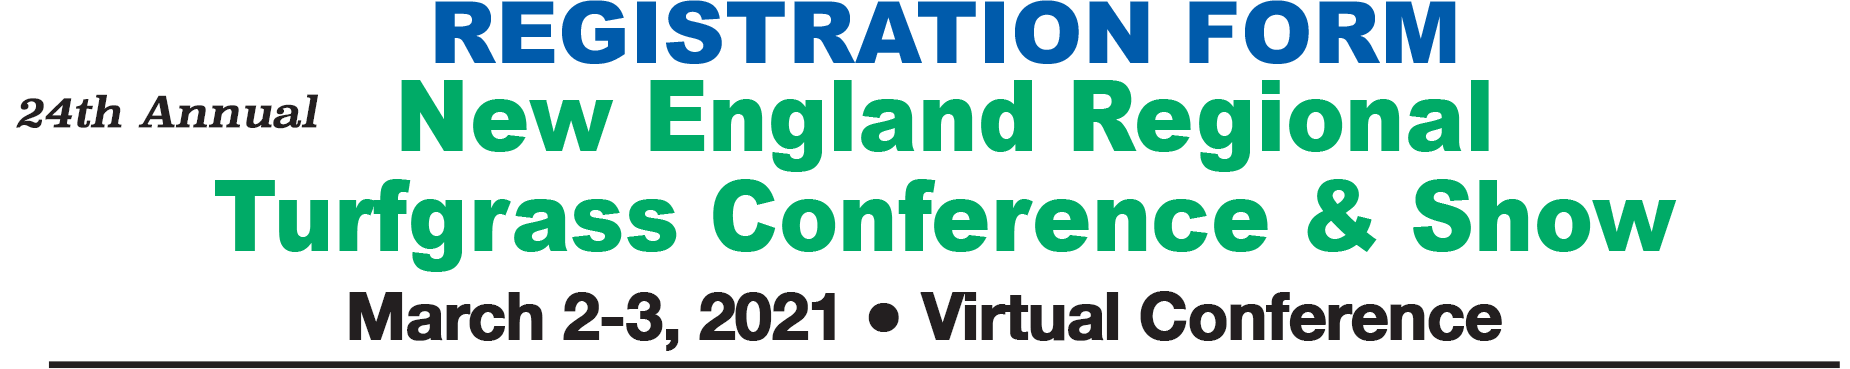 2021 New England Regional Turfgrass Conference & Show